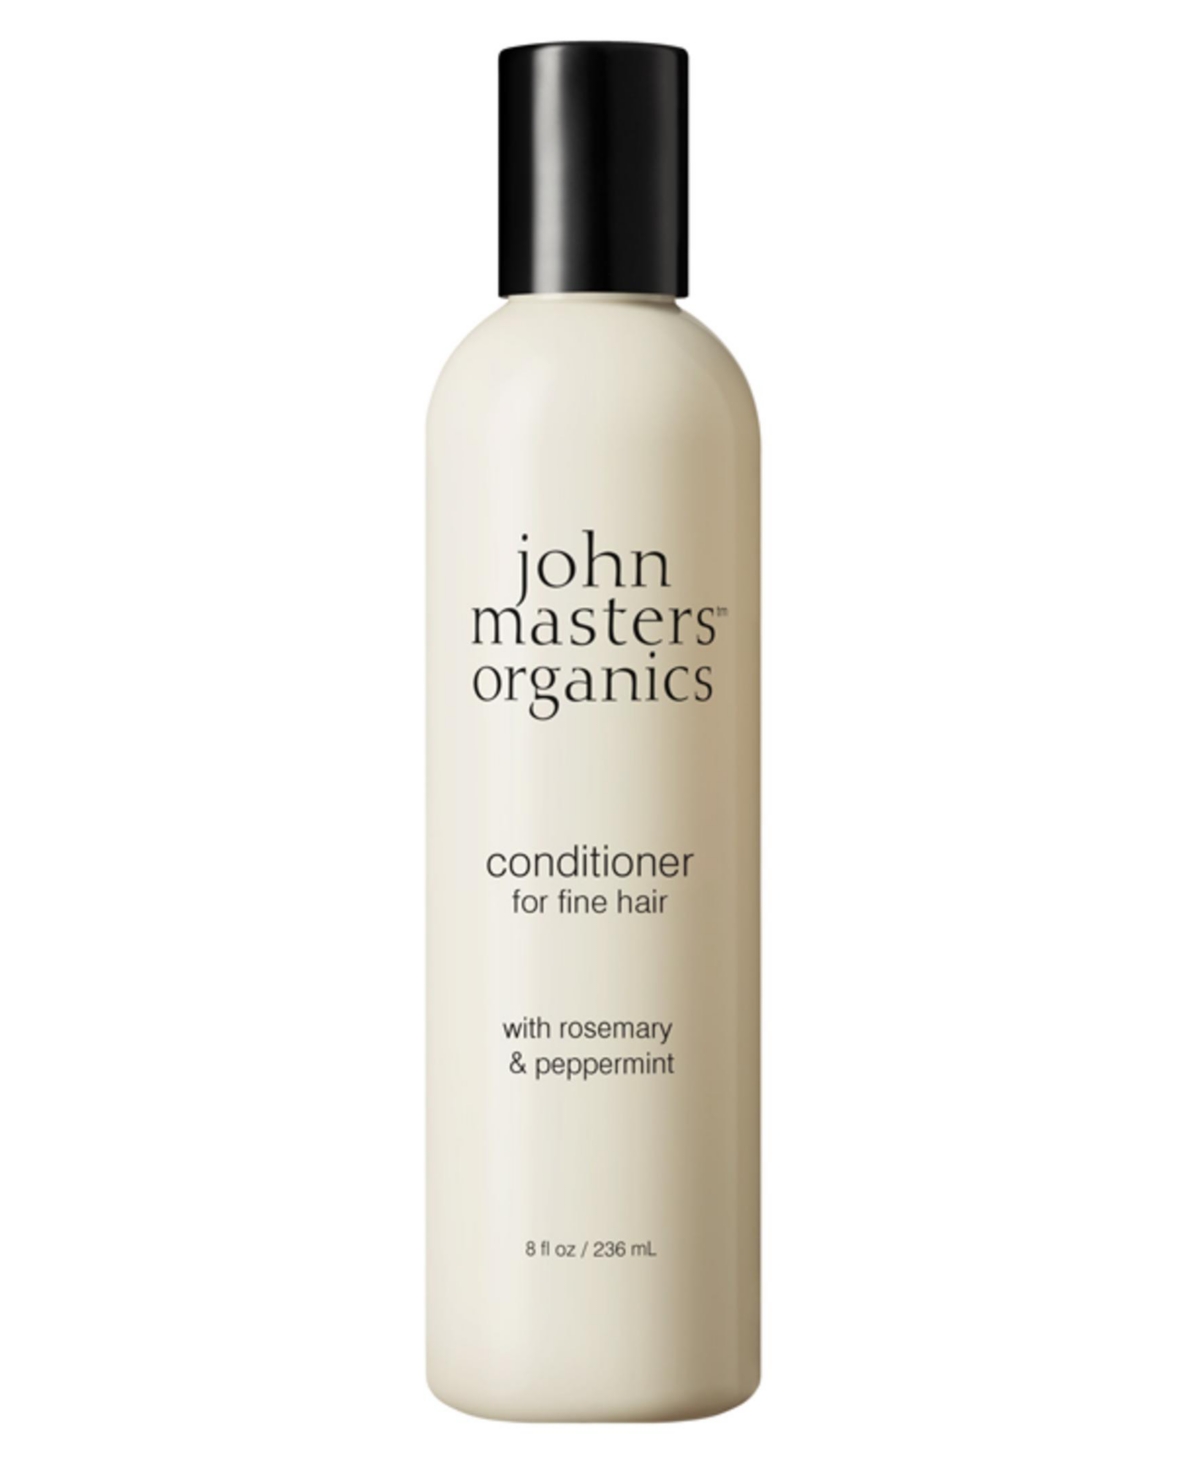 John Masters Organics Conditioner For Fine Hair With Rosemary And Peppermint, 8 Fl oz